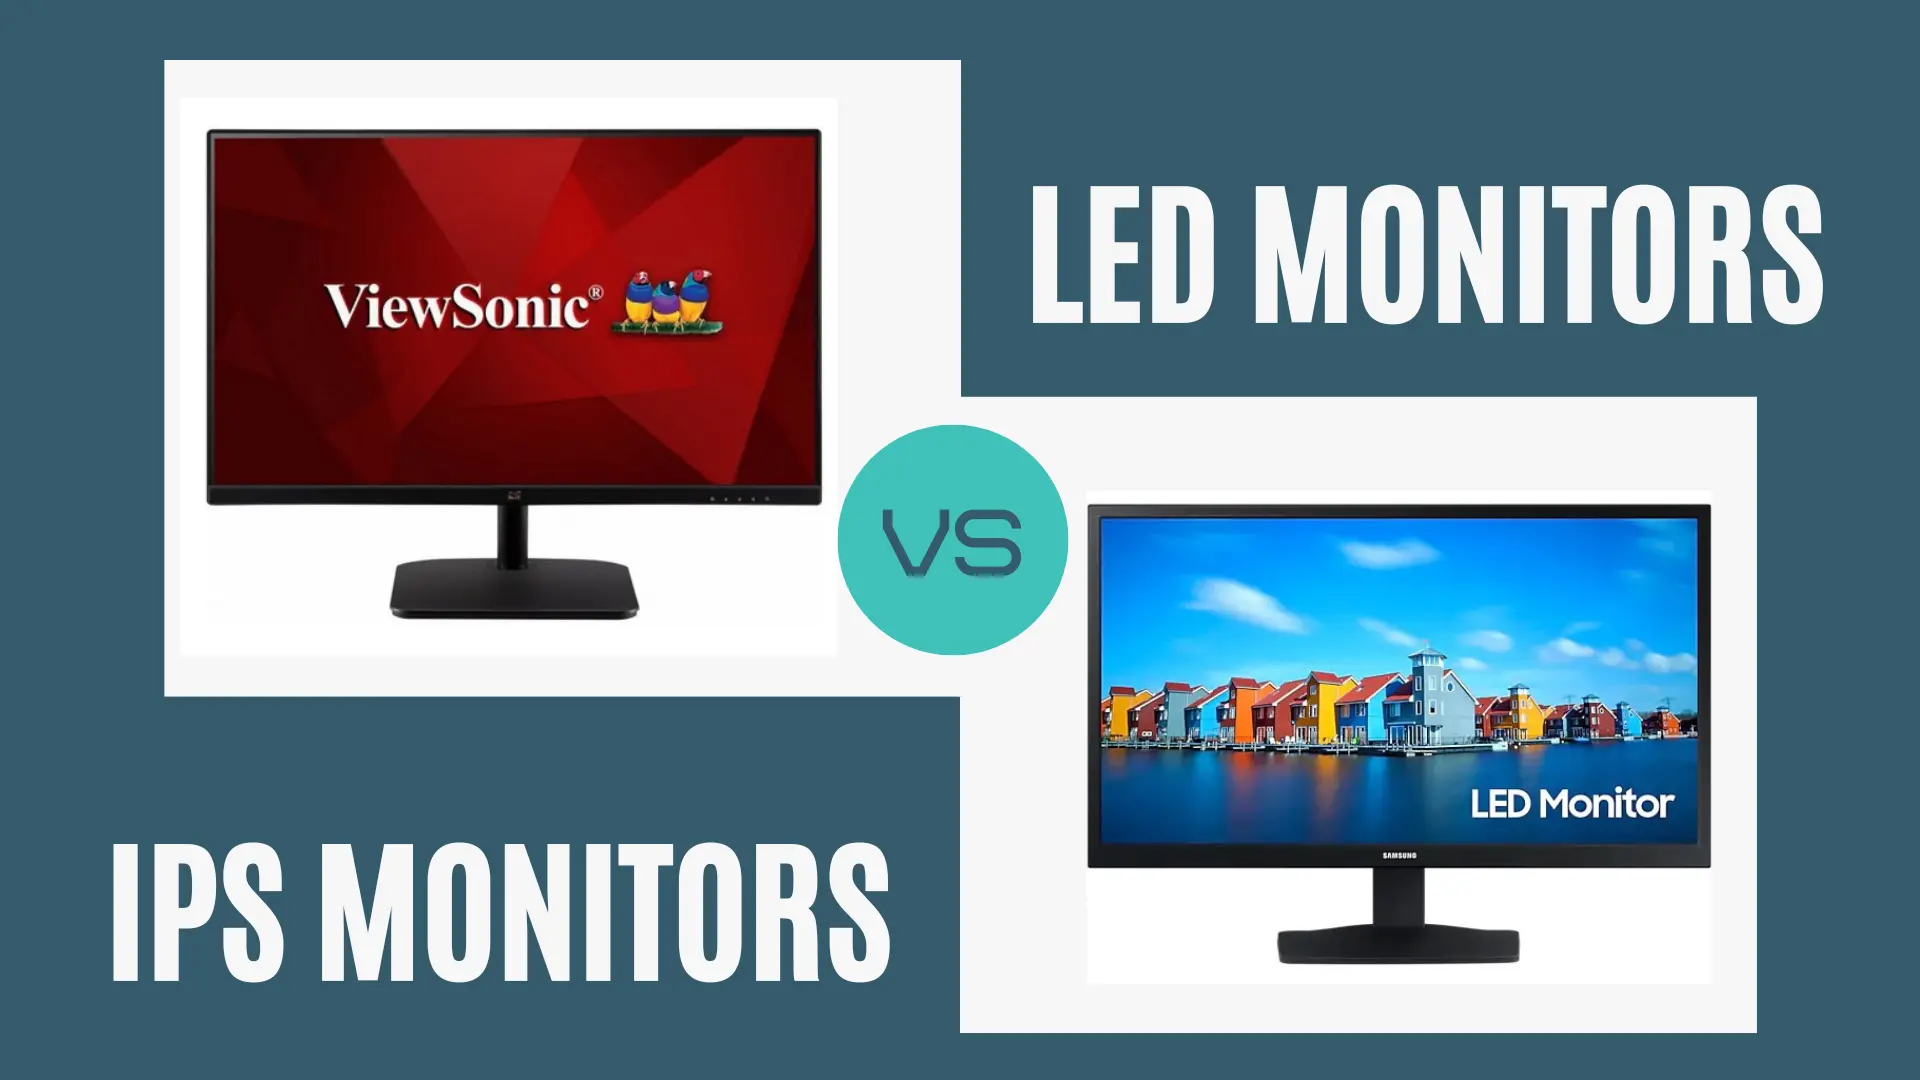 What Is IPS and What Are IPS Monitors